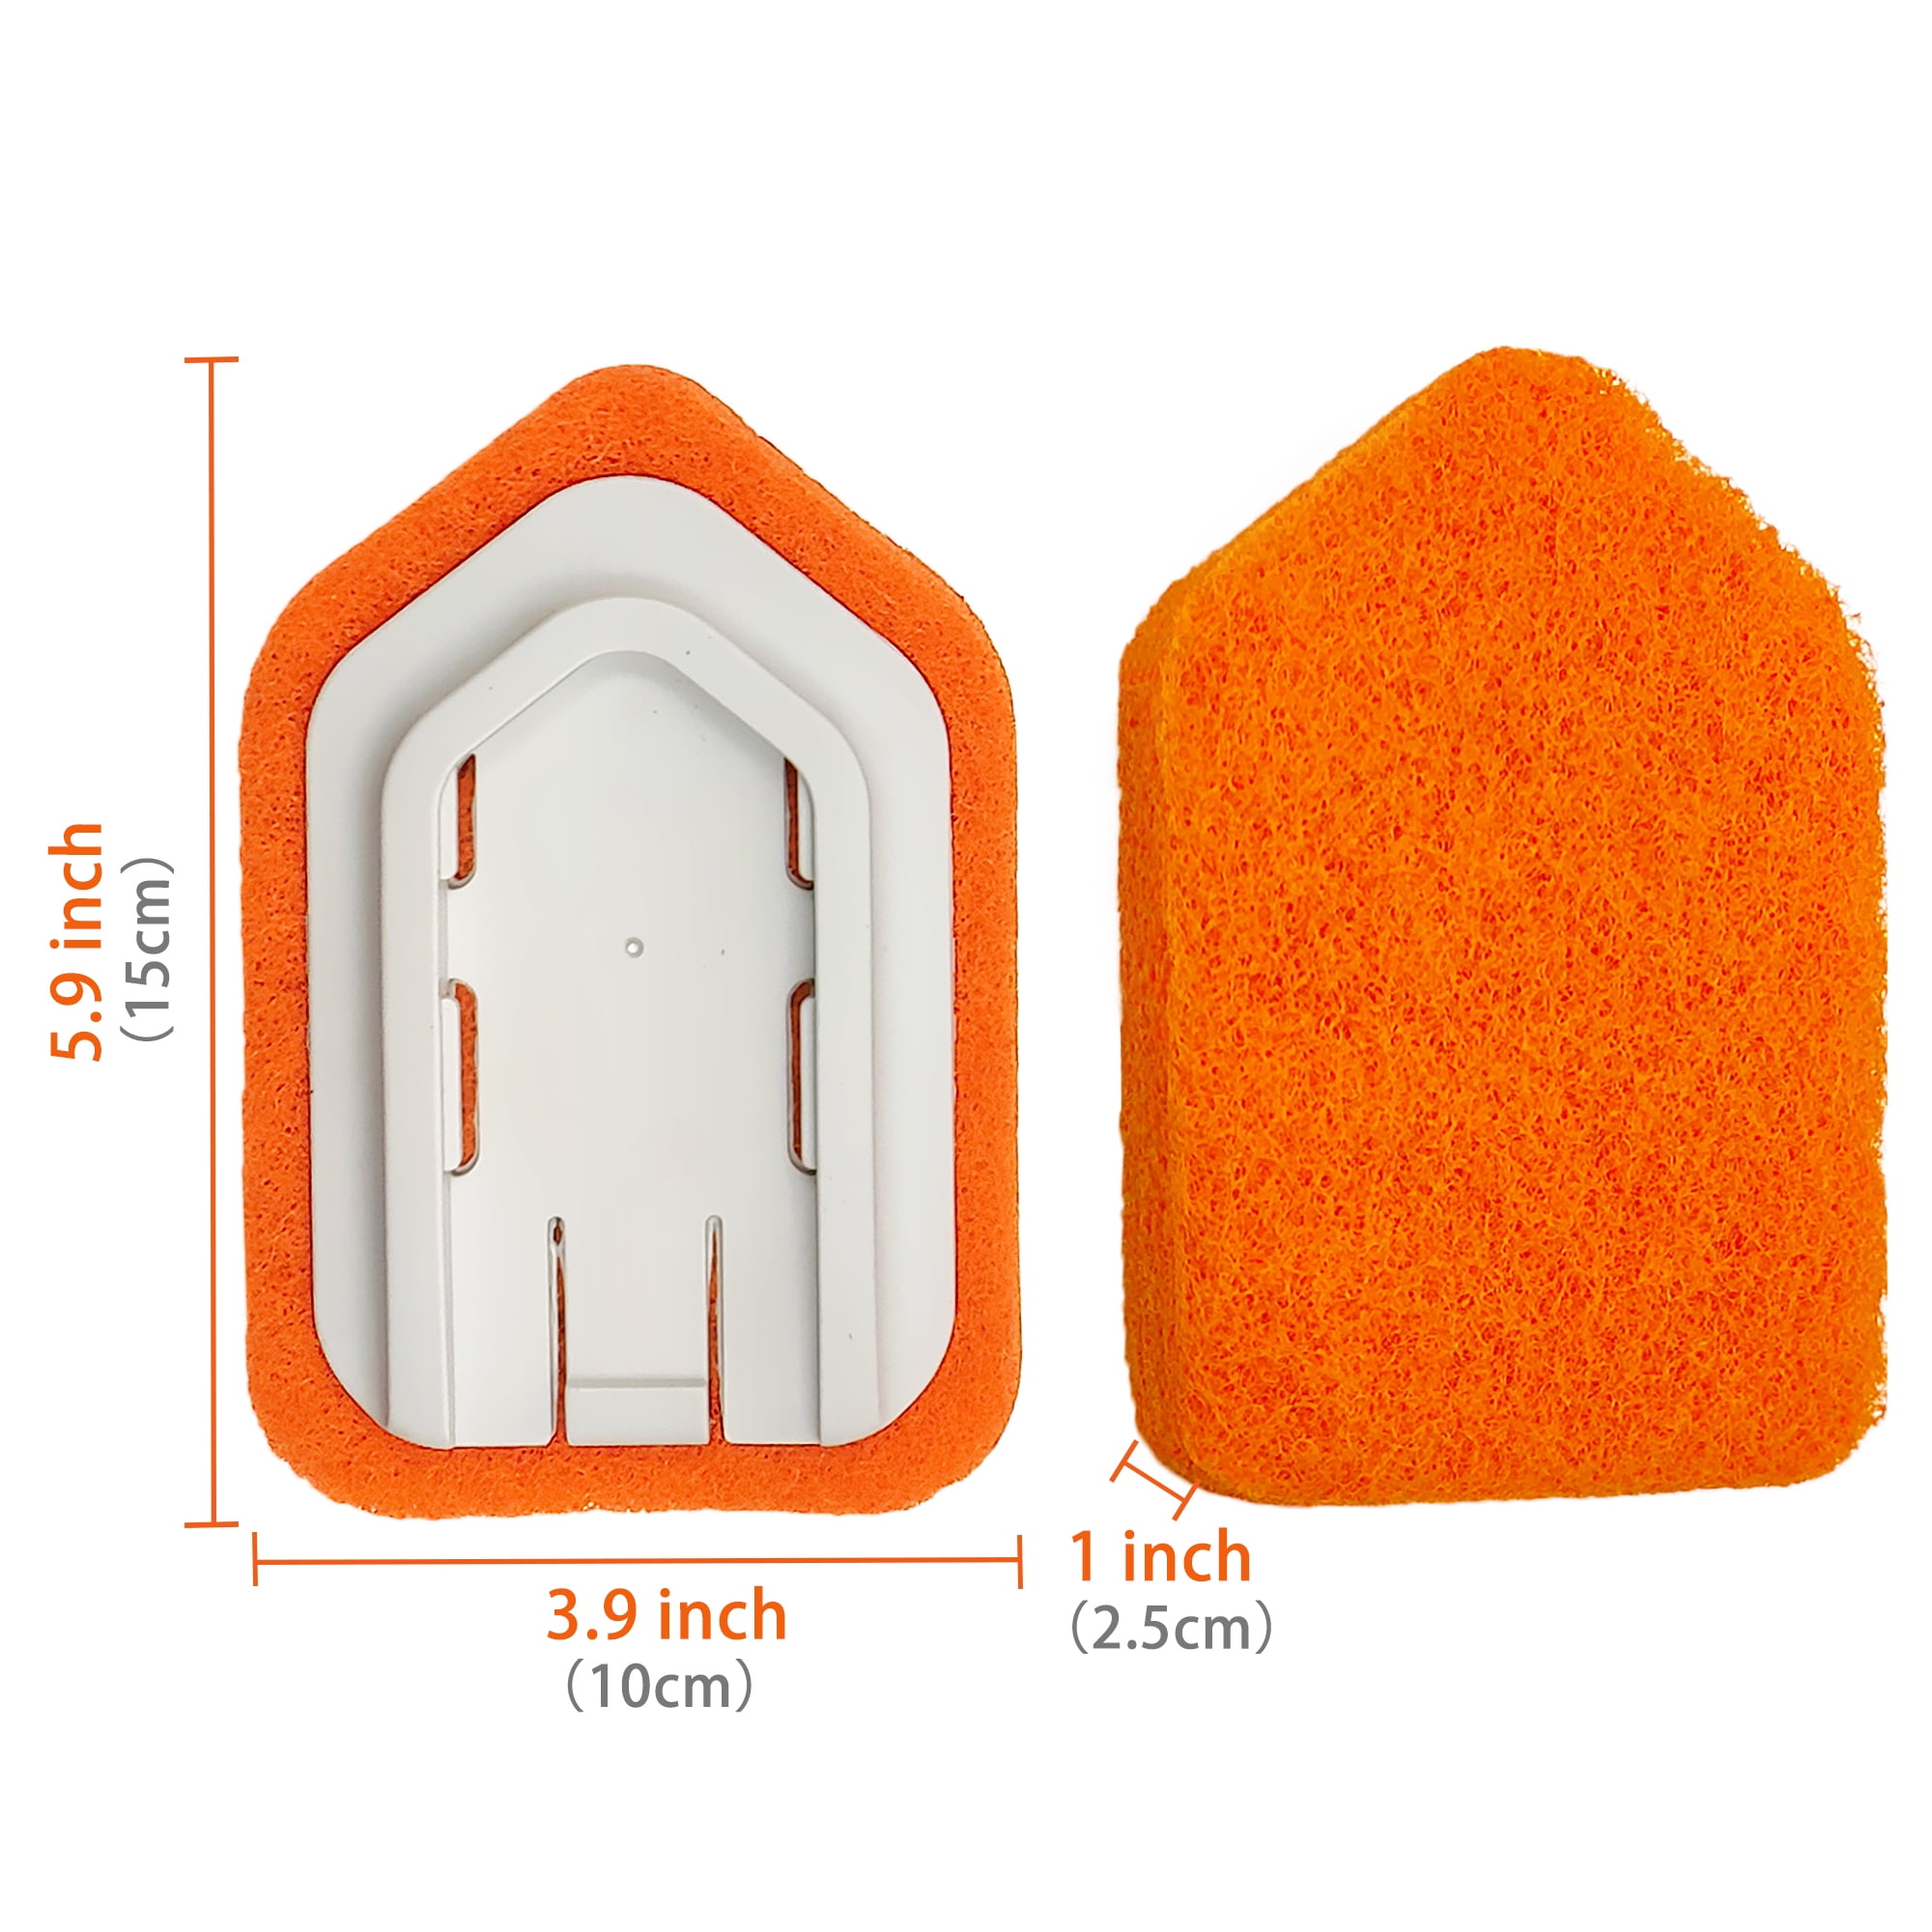 OXO Good Grips Tub and Tile Scrubber Refill, Orange, 1 Count (Pack of 1)